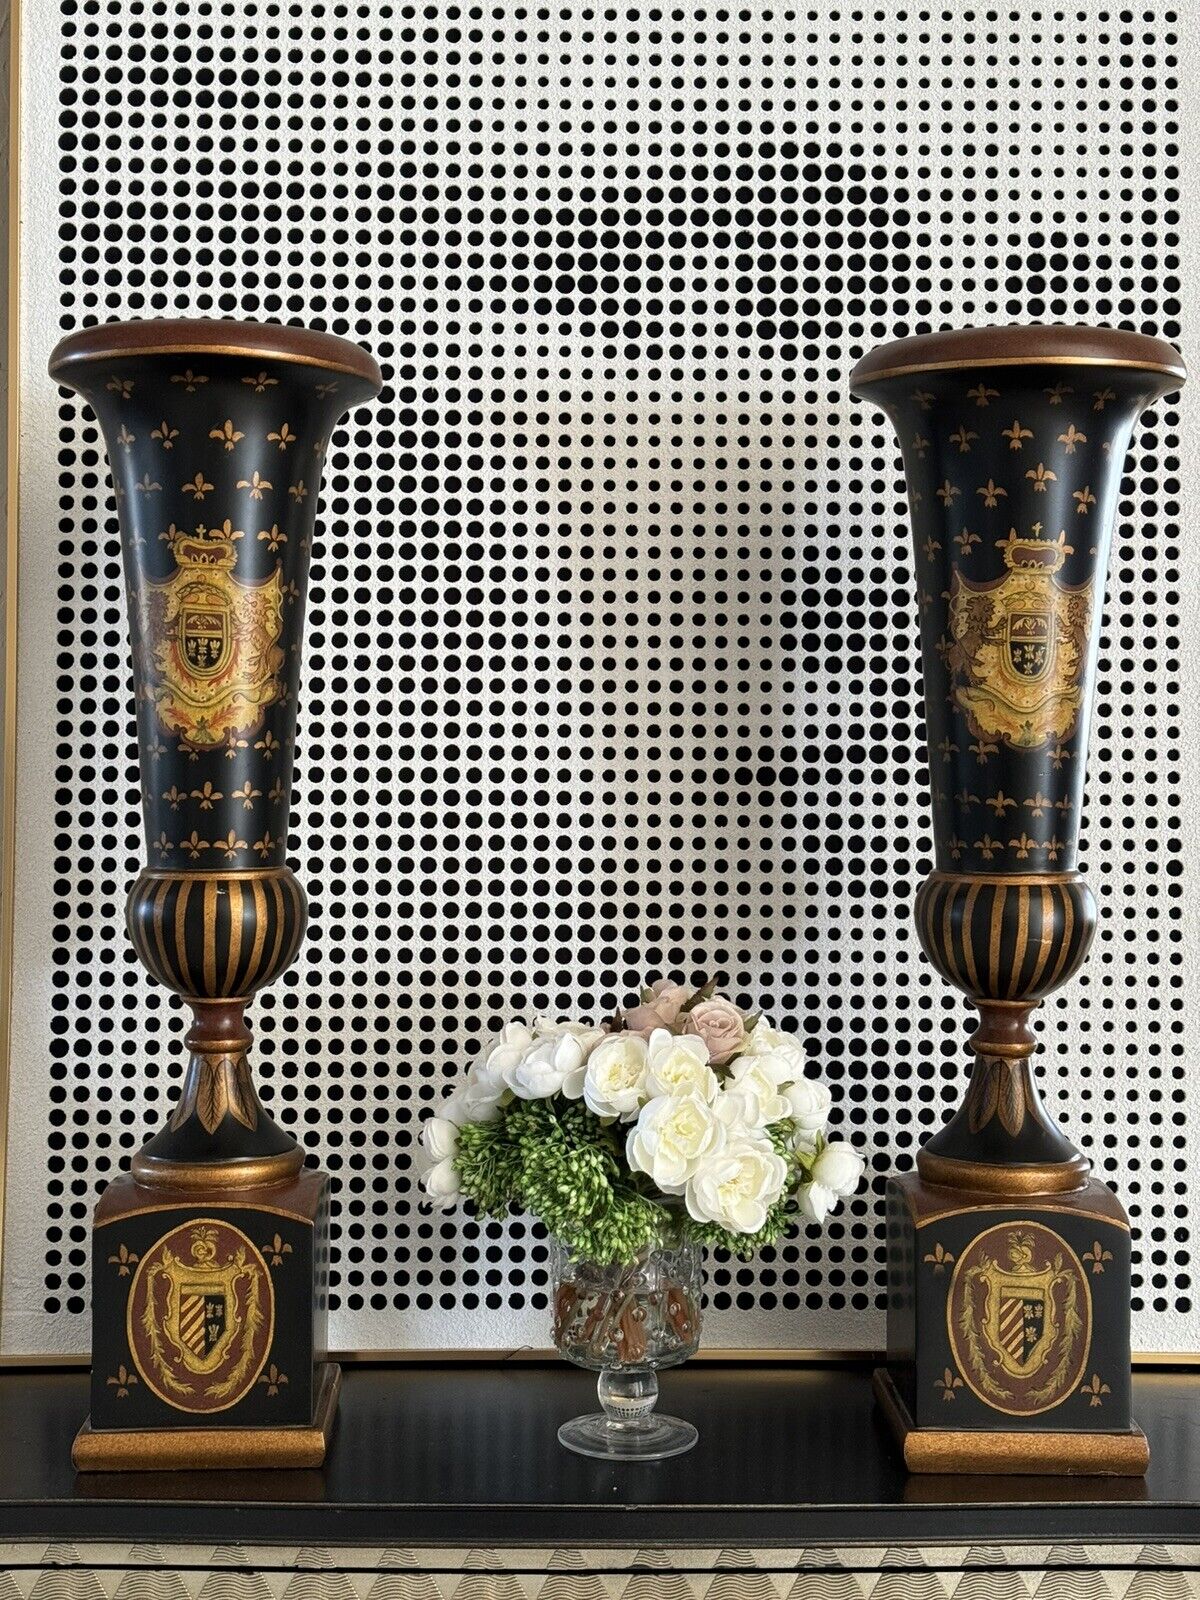 A Pair Of statement making black and gold Trophy Shaped Vases 24 5/8” Tall